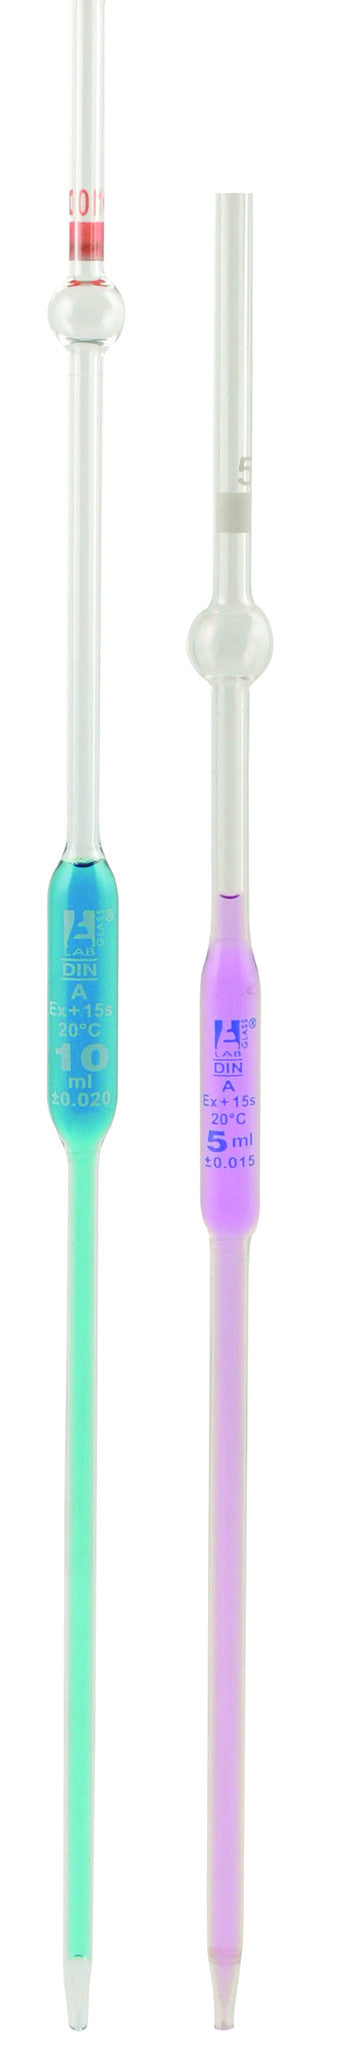 Pipette class 'B' with safety bulb, 100ml